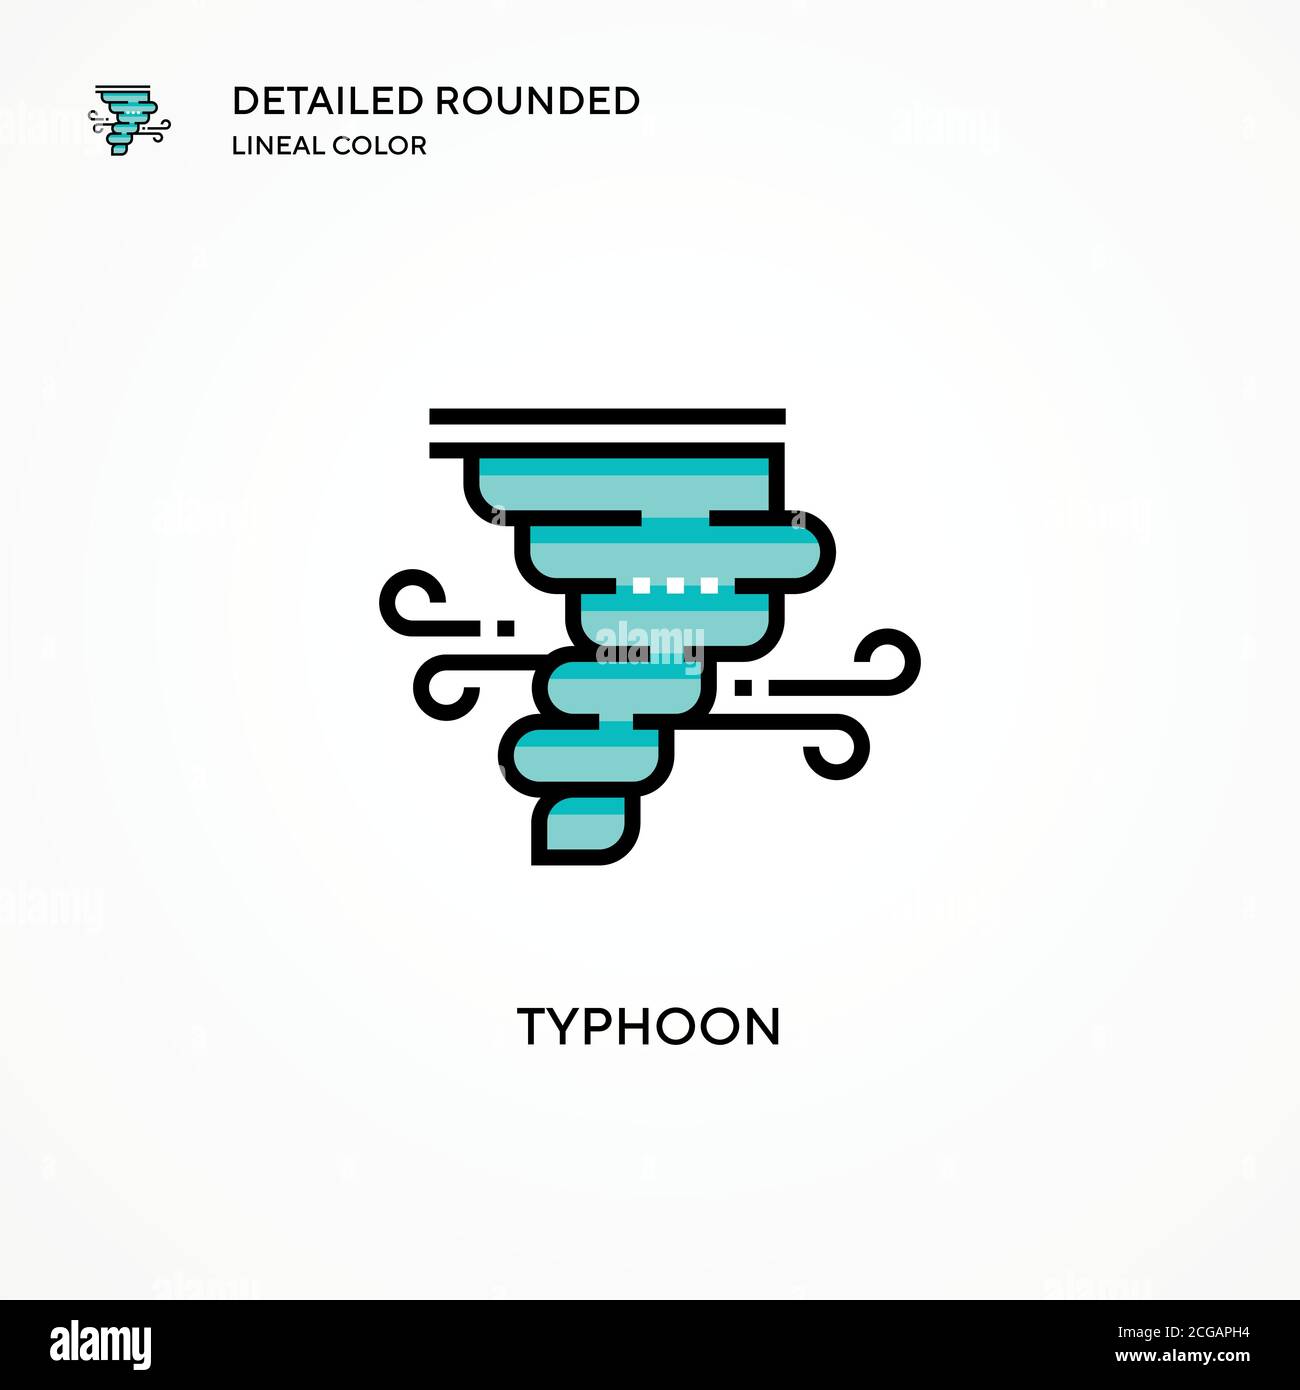 Typhoon vector icon. Modern vector illustration concepts. Easy to edit and customize. Stock Vector